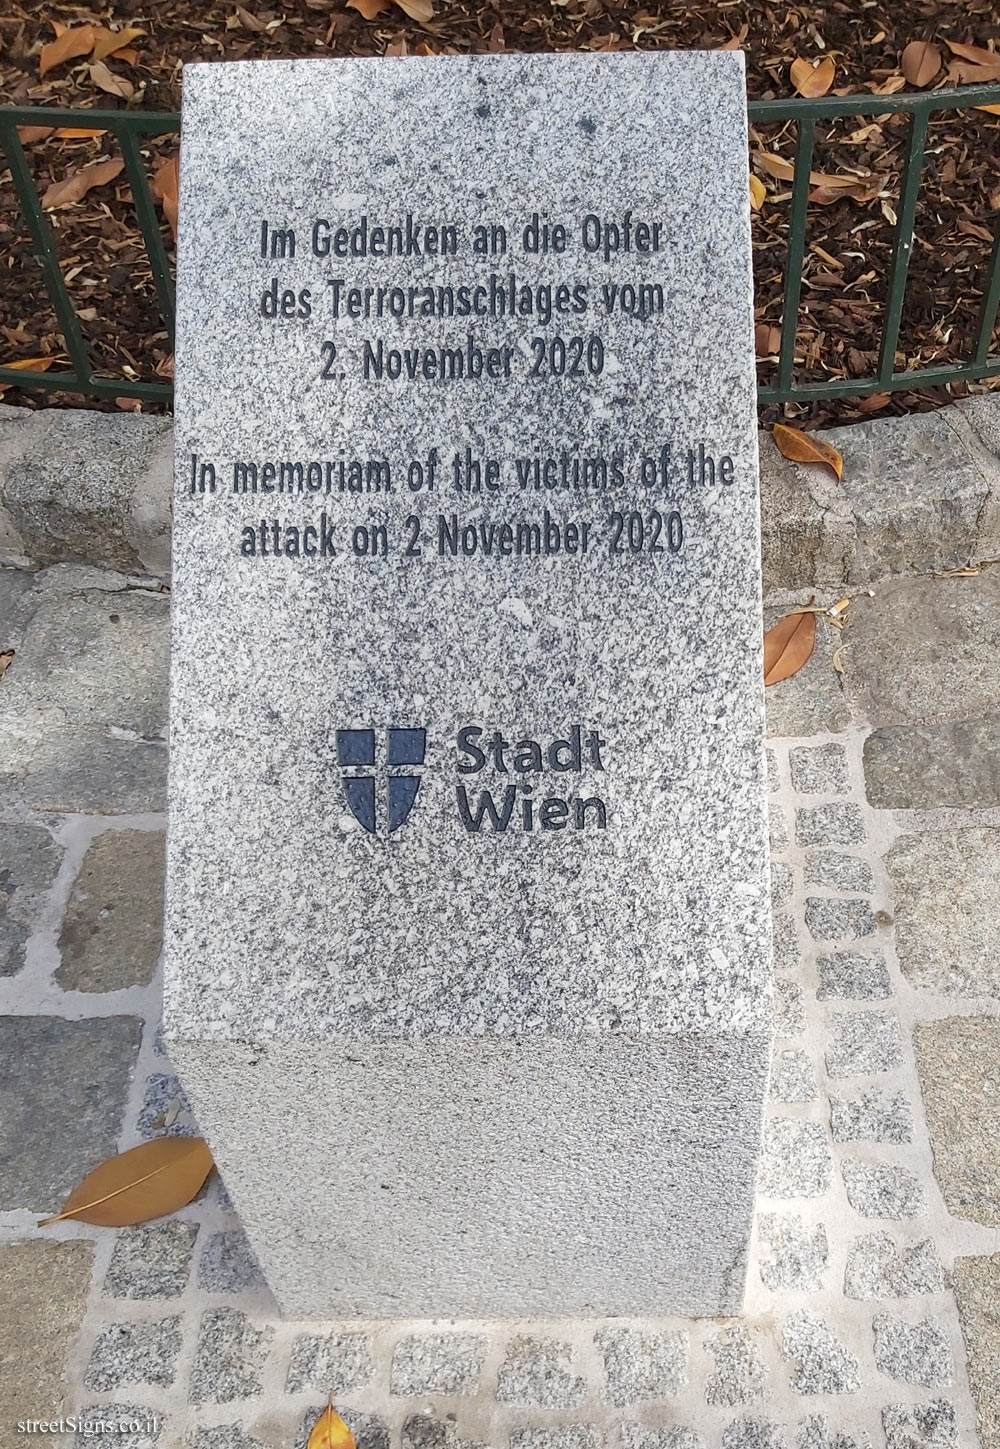 Vienna - Memorial to the victims of the shooting attack in 2020